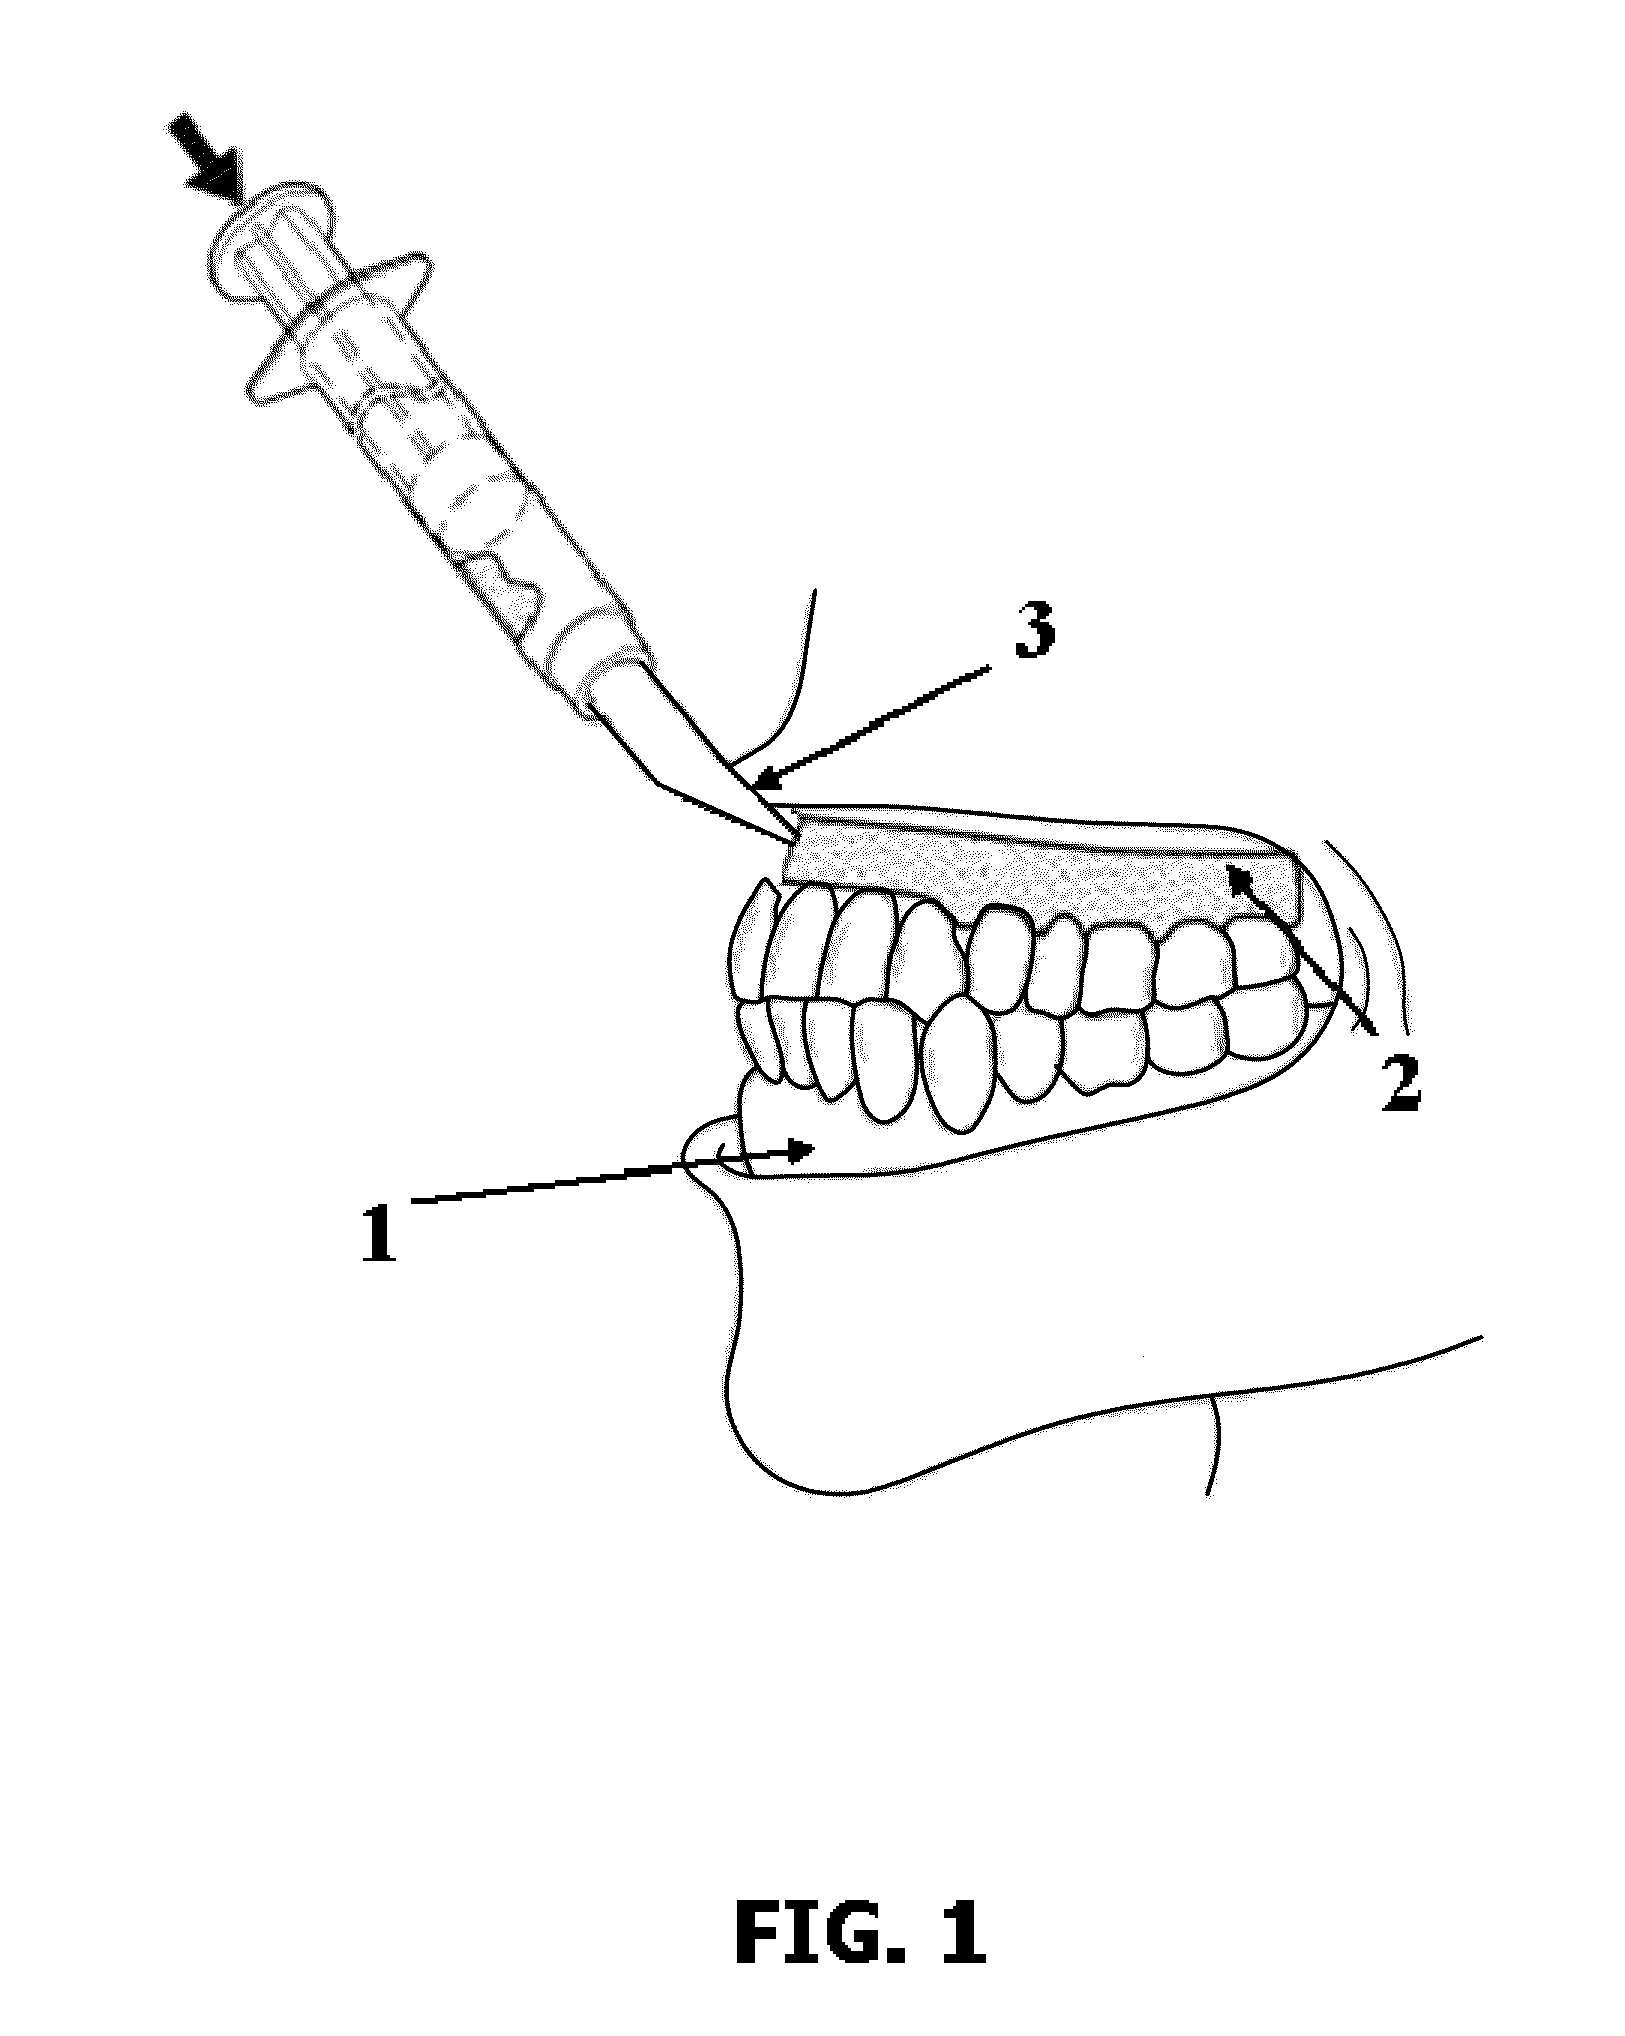 Composition for dental barrier comprising at least one monomer, at least one polymerization initiating system, and at least one indicator enabling the polymerization reaction to be monitored